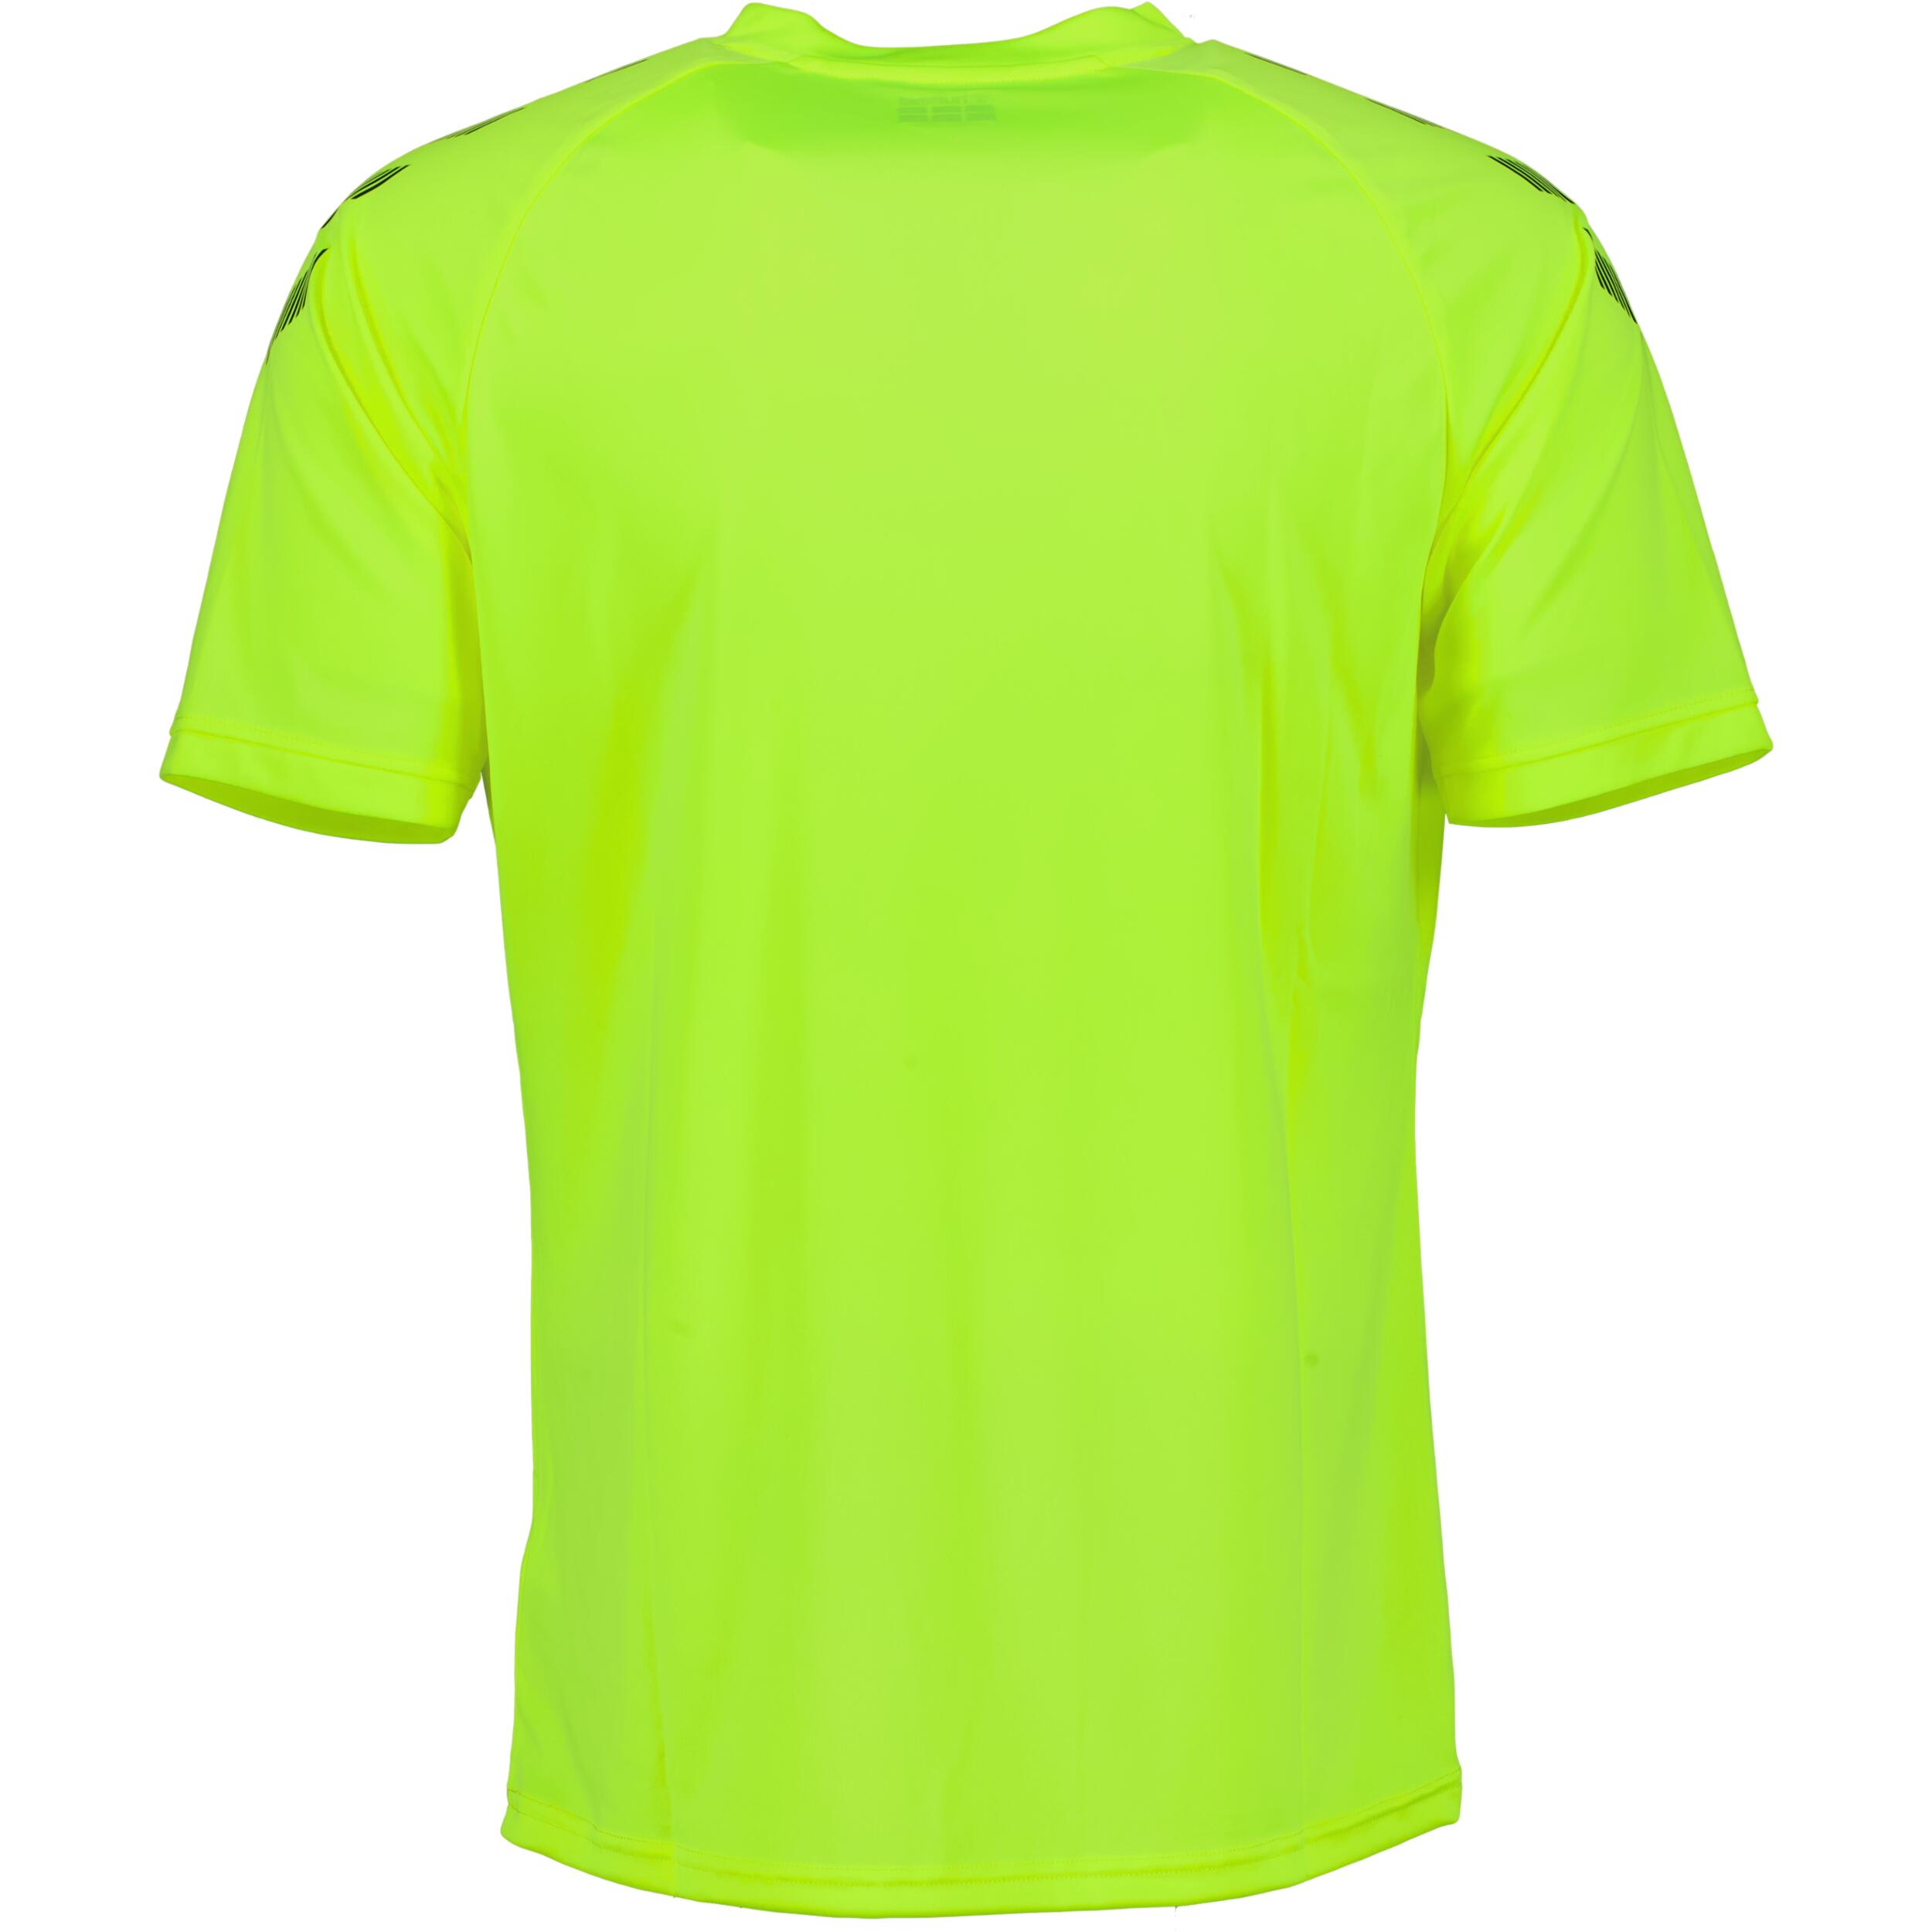 Poly jersey for men, great for football, in safety yellow 2/3